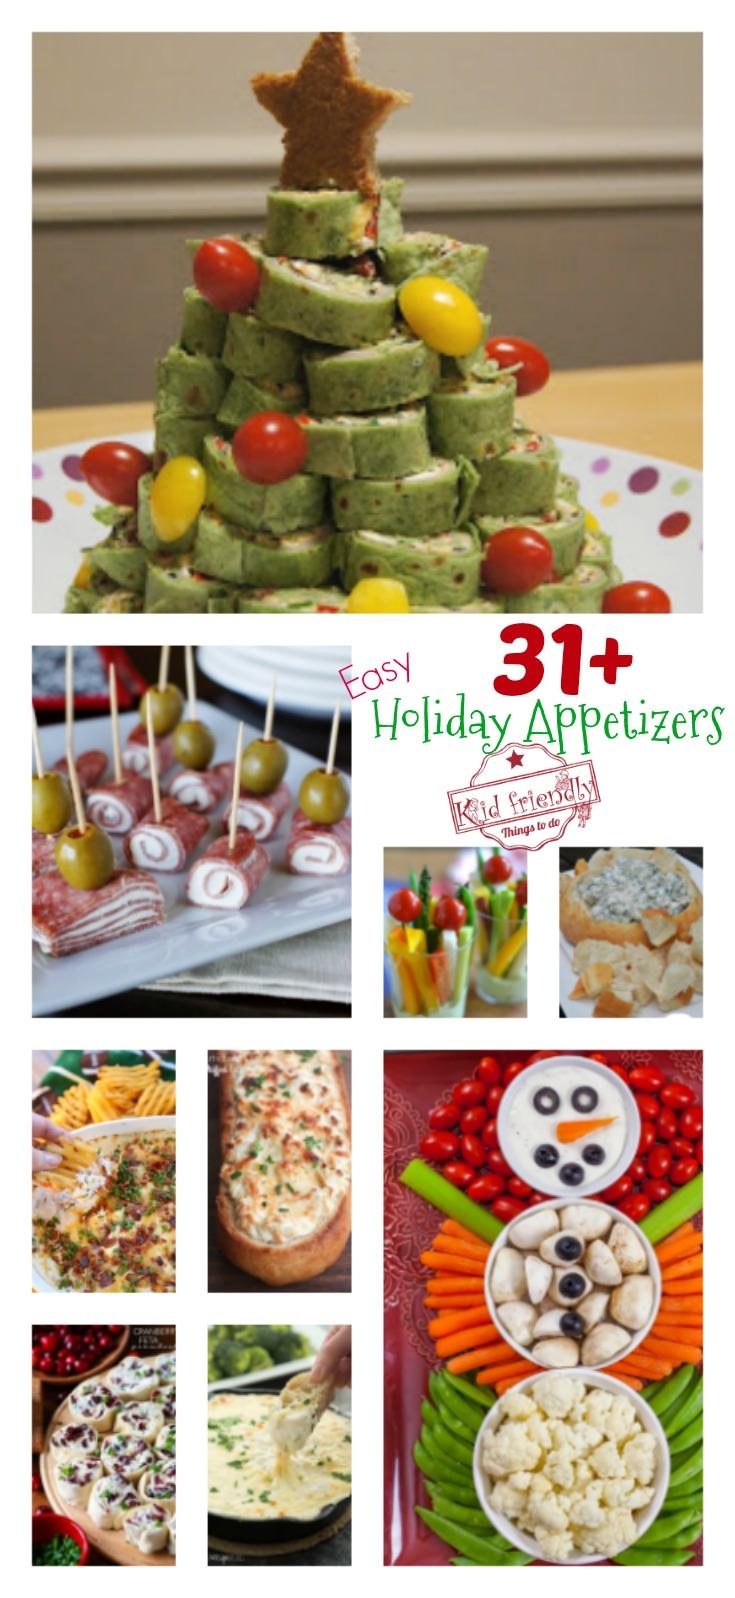 Over 31 Easy Holiday Appetizers to Make | Kid Friendly Things To Do -   19 thanksgiving appetizers for kids ideas